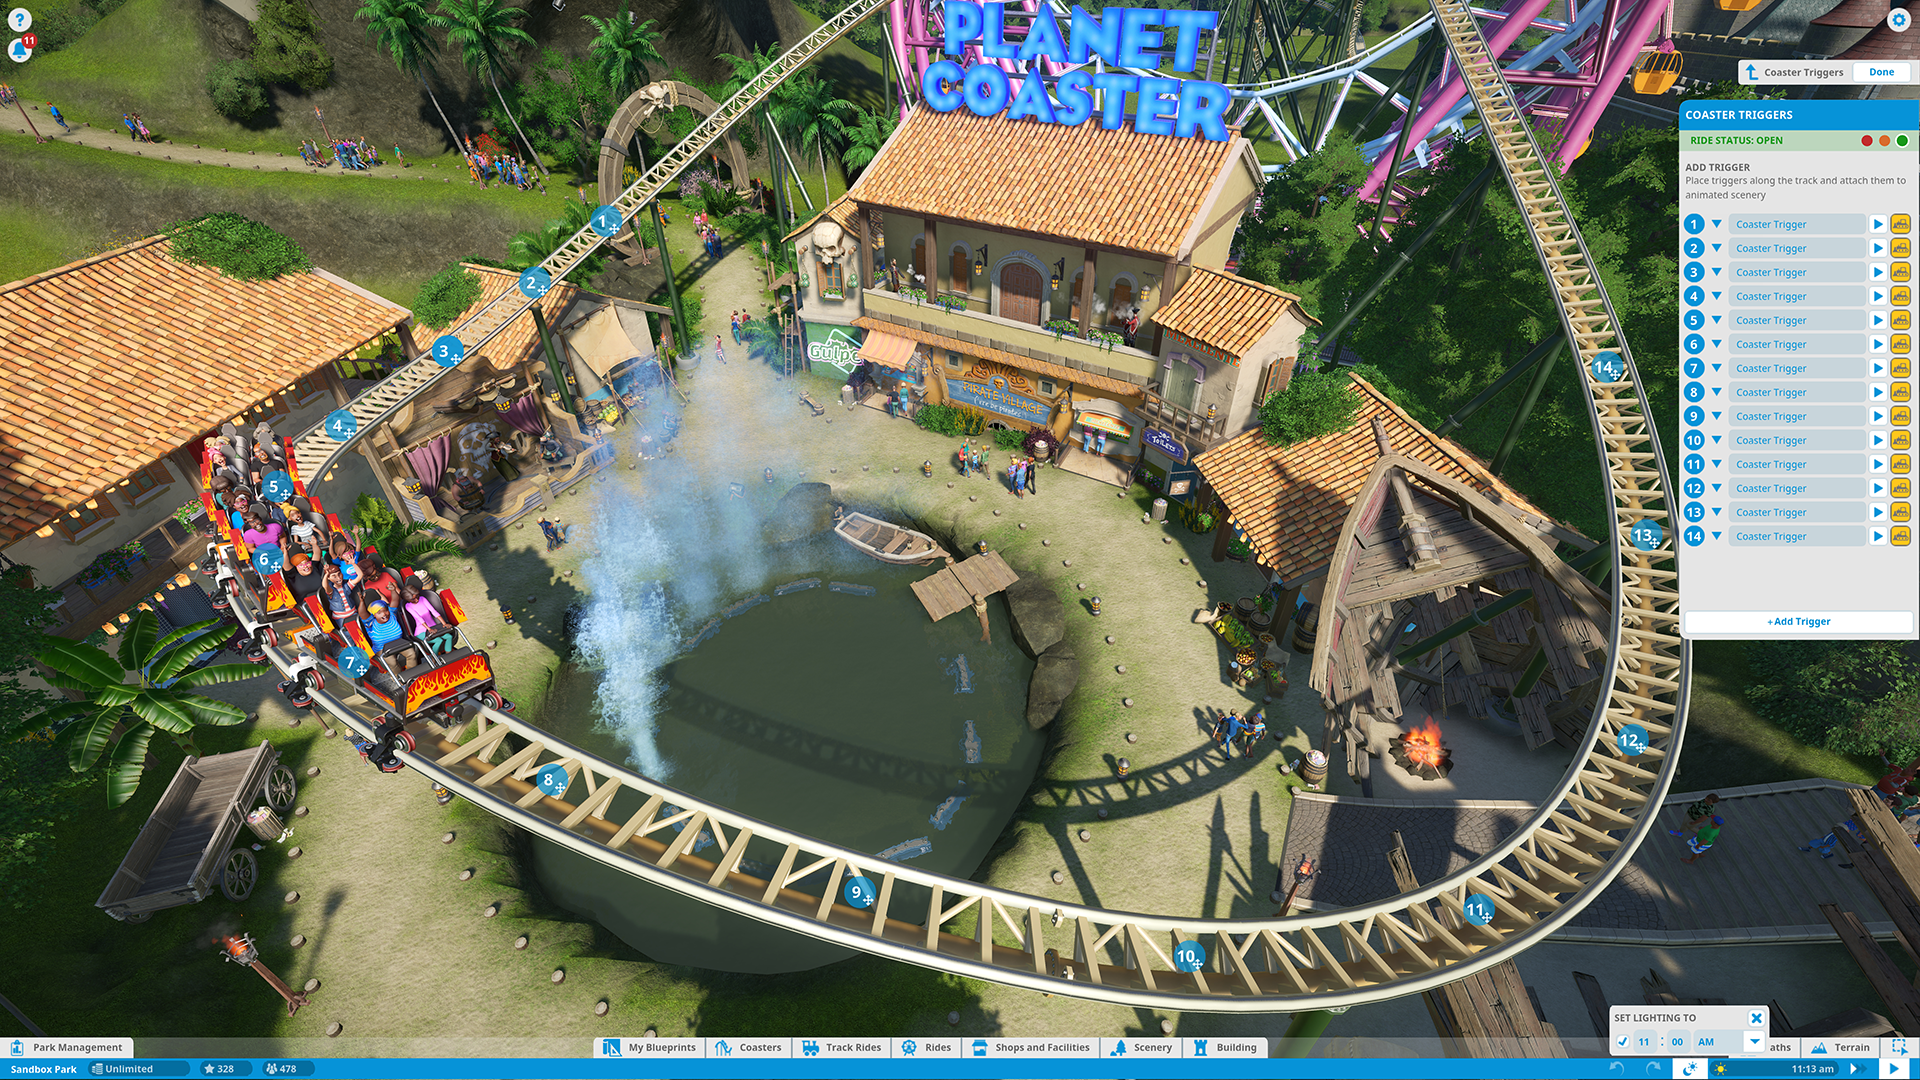 Planet Coaster Review This Is The Theme Park Game You Ve Been